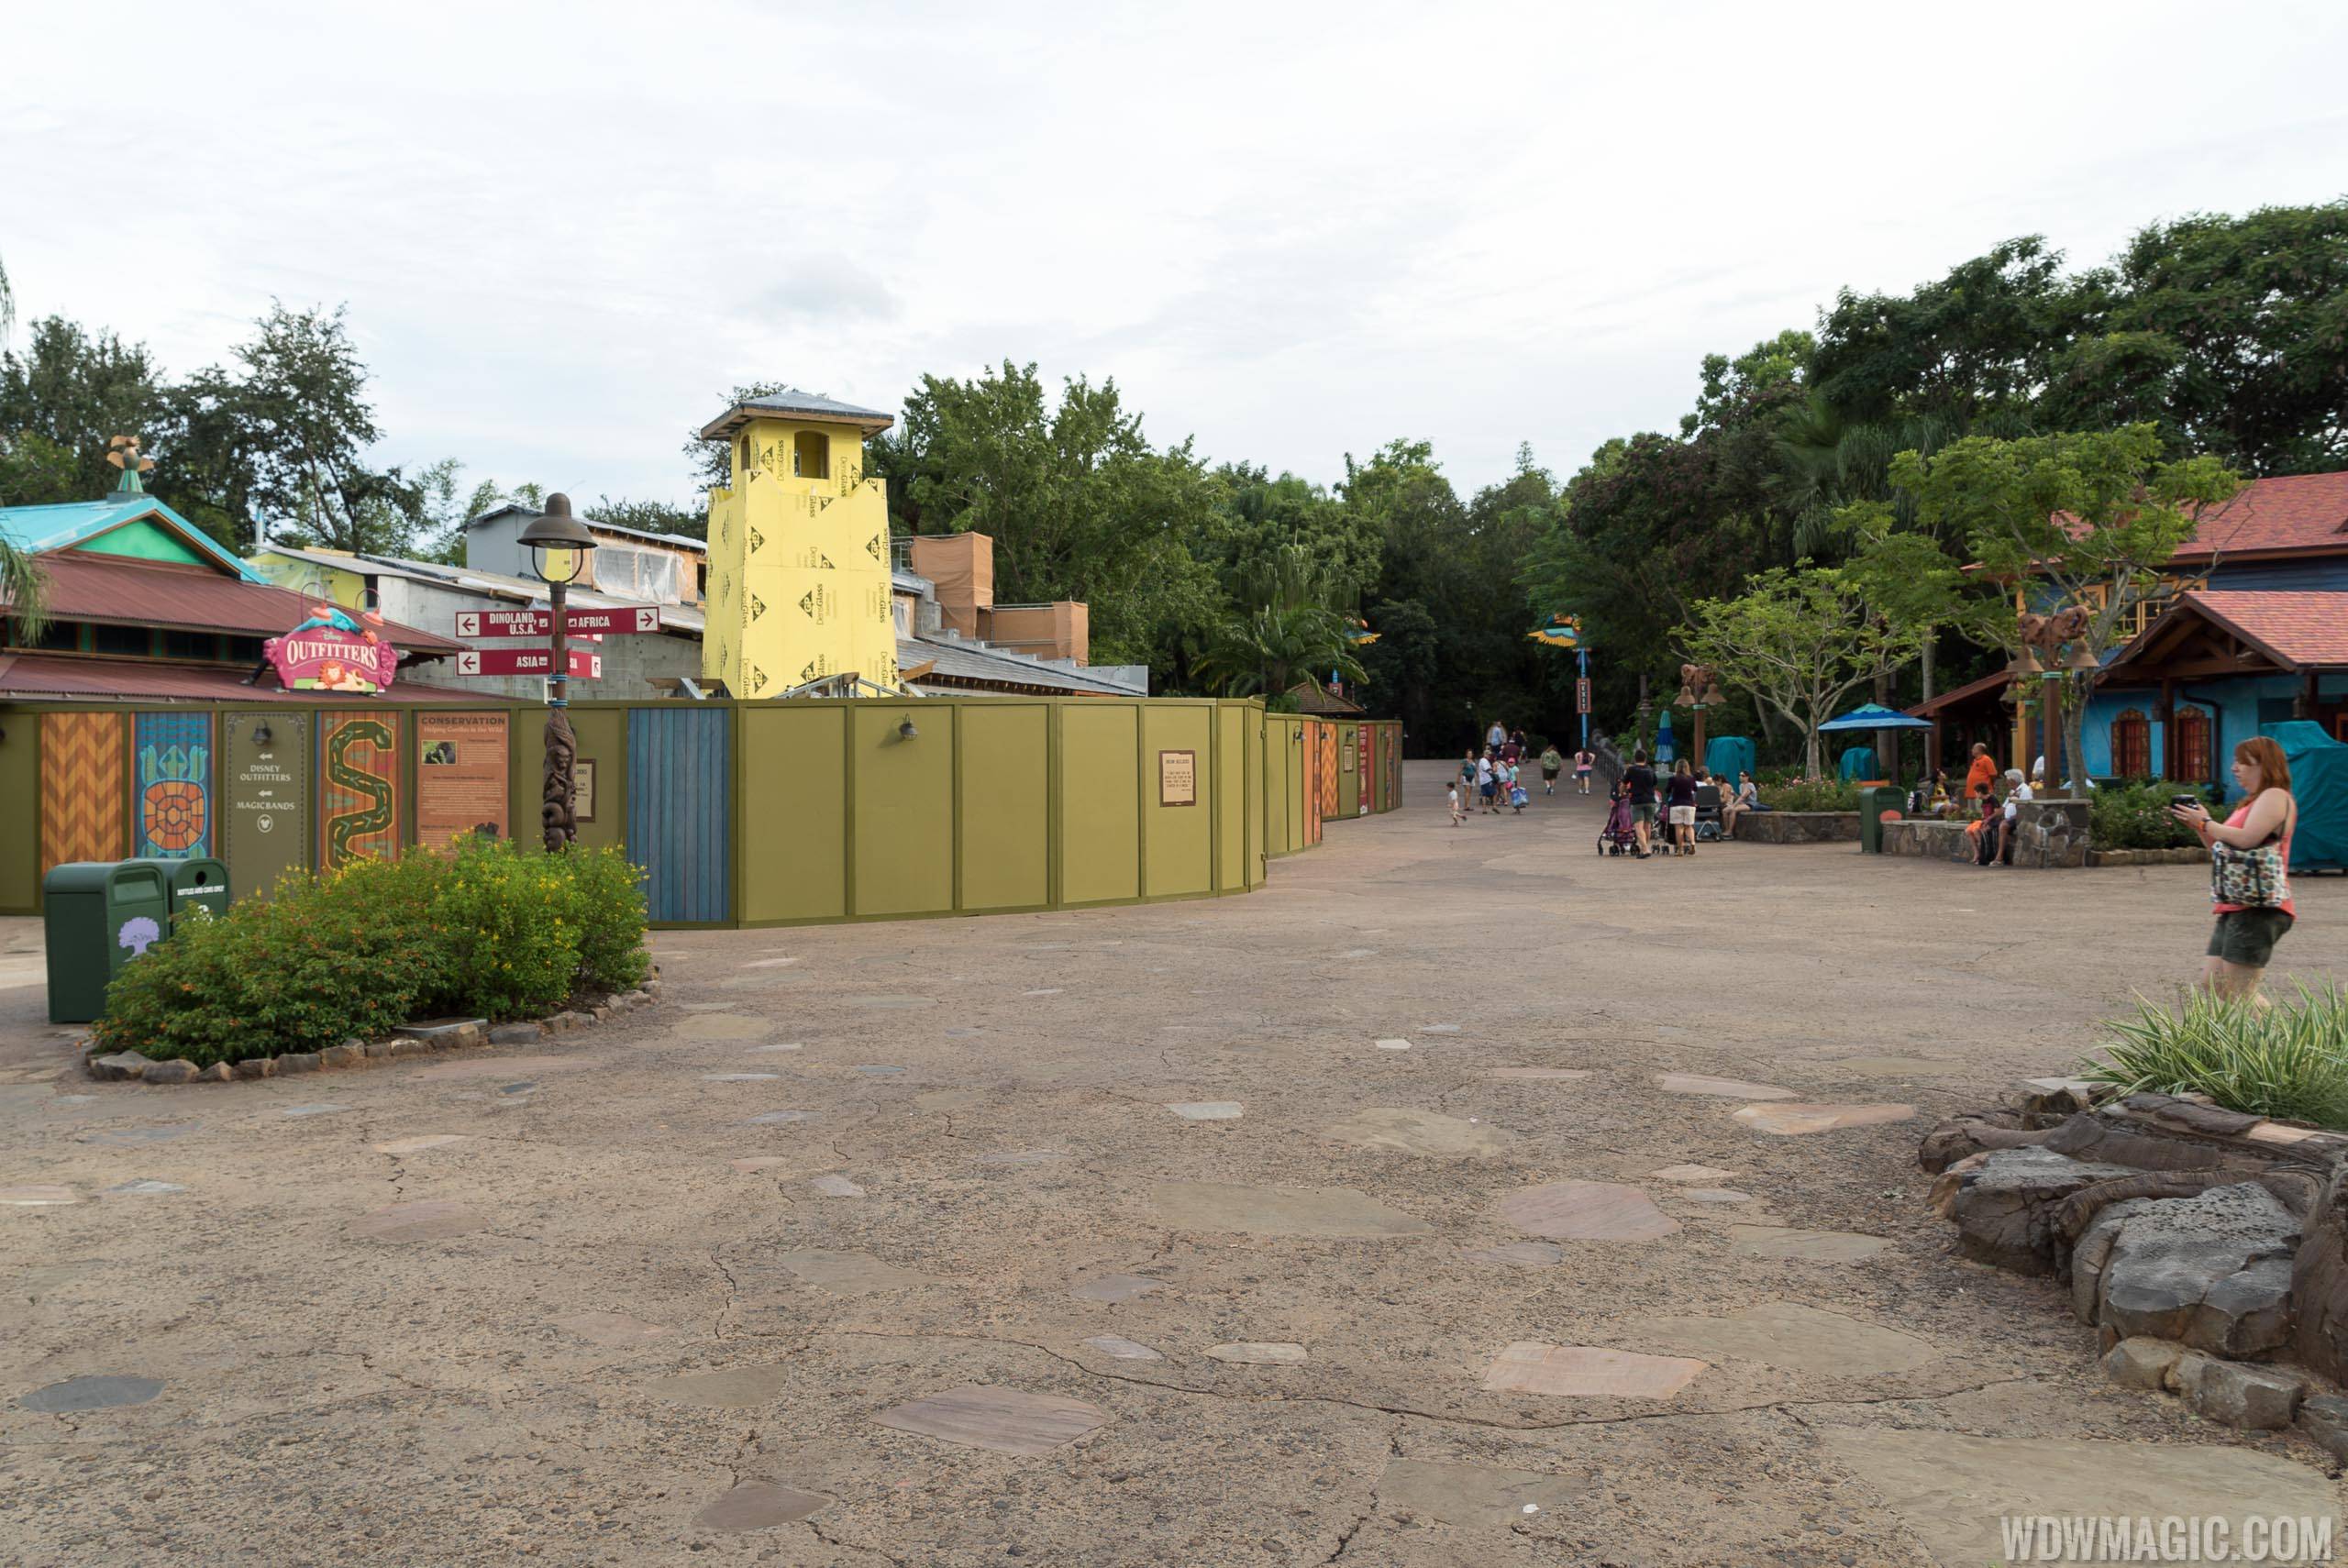 PHOTOS - Latest look at the progress on the expansion of Disney Outfitters at Disney's Animal Kingdom